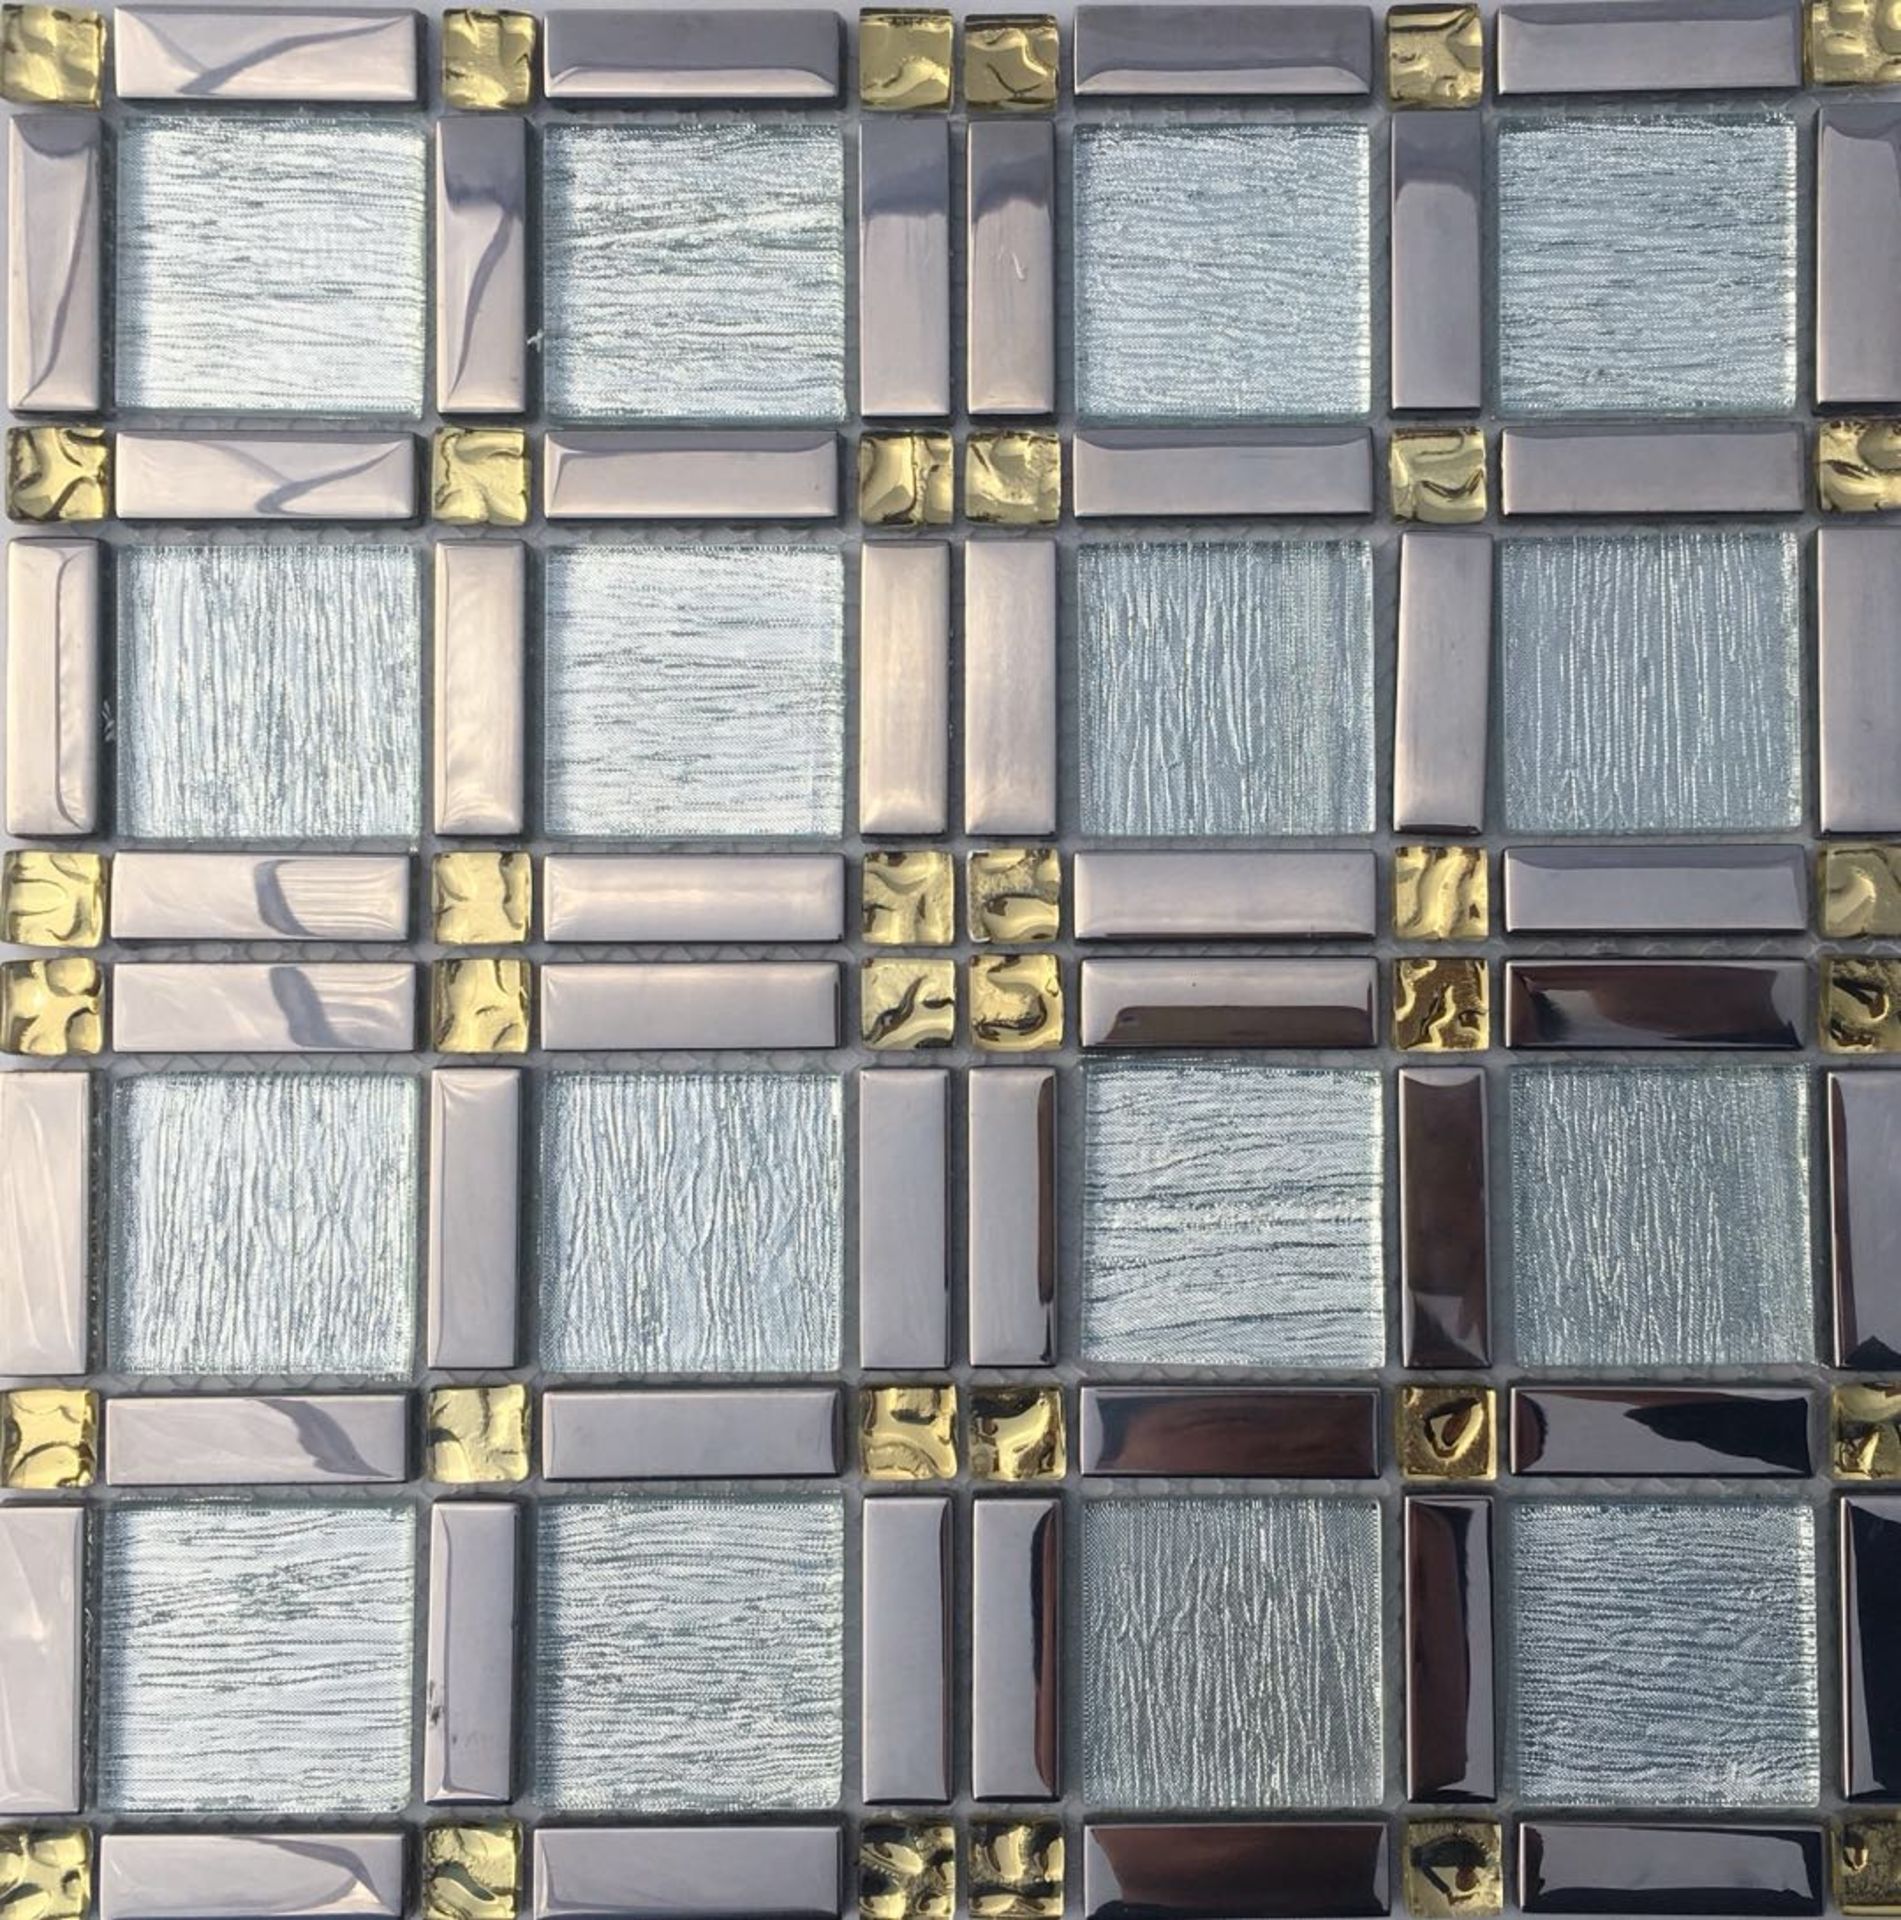 10 Square Metres - High Quality Glass/Stainless Steel Mosaic Tiles - Image 2 of 2